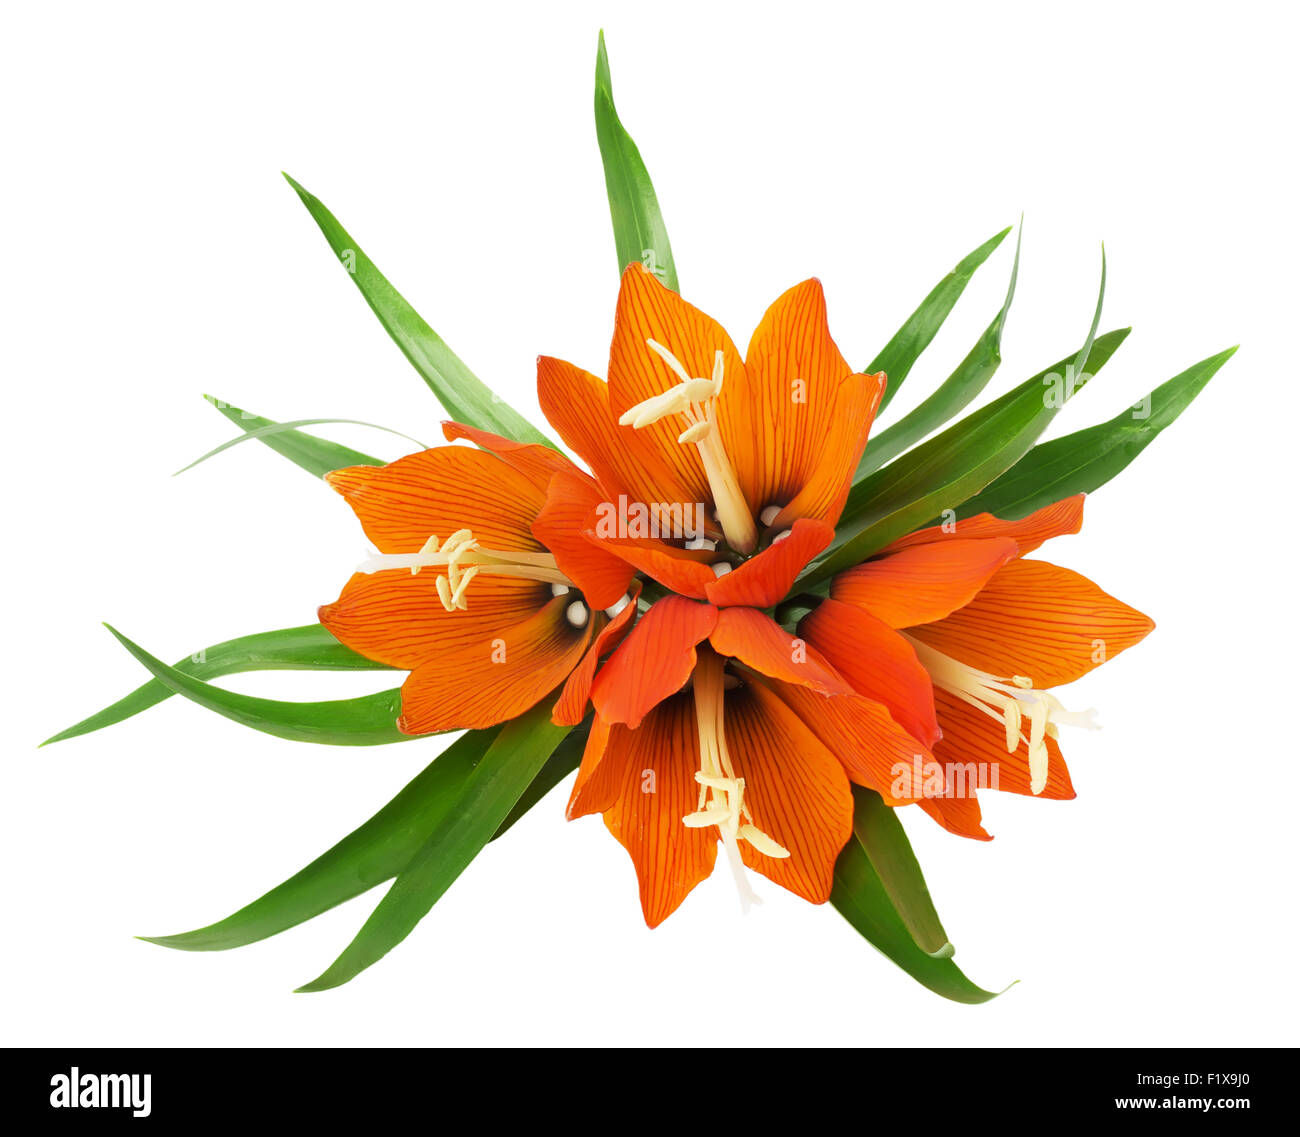 bouquet of lilies on a white background Stock Photo